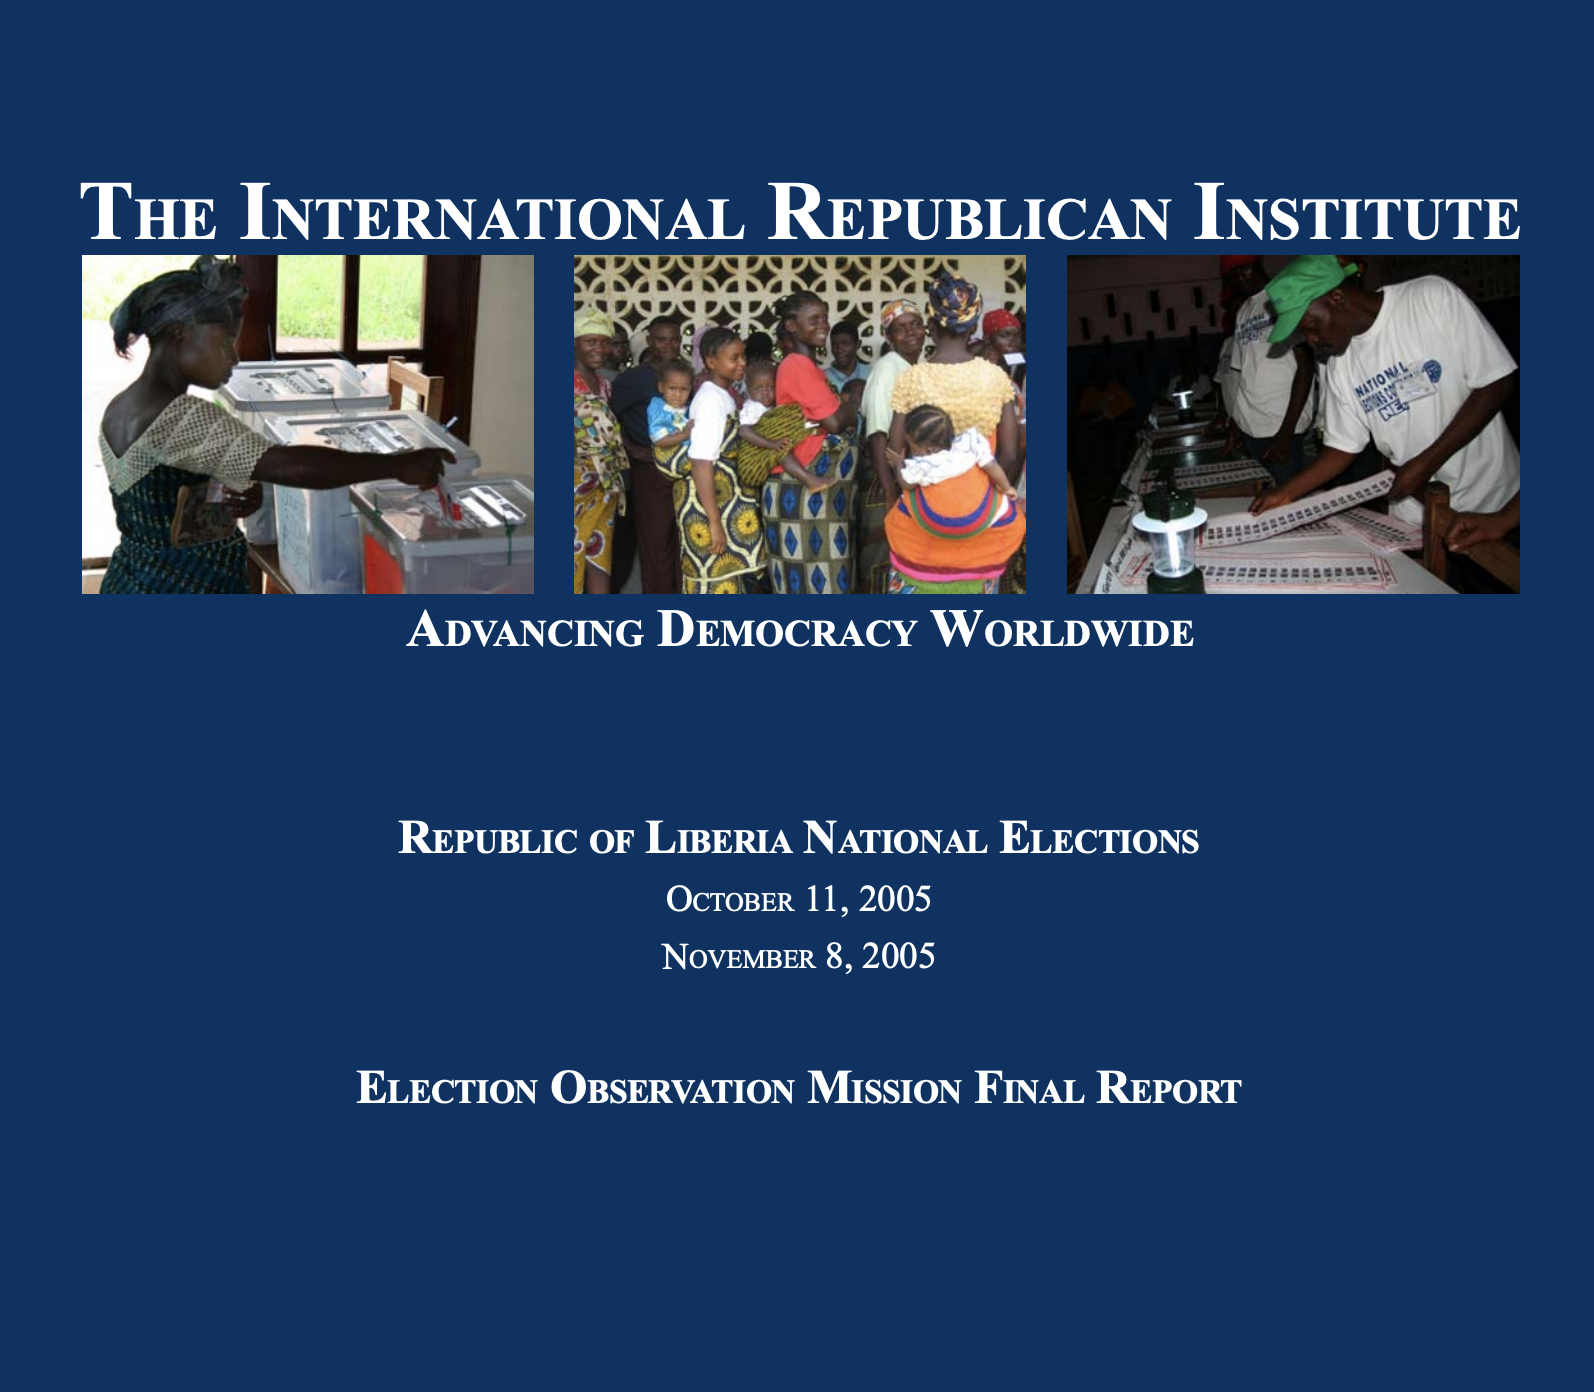 REPUBLIC OF LIBERIA NATIONAL ELECTIONS OCTOBER 11, 2005 NOVEMBER 8, 2005 ELECTION OBSERVATION MISSION FINAL REPORT